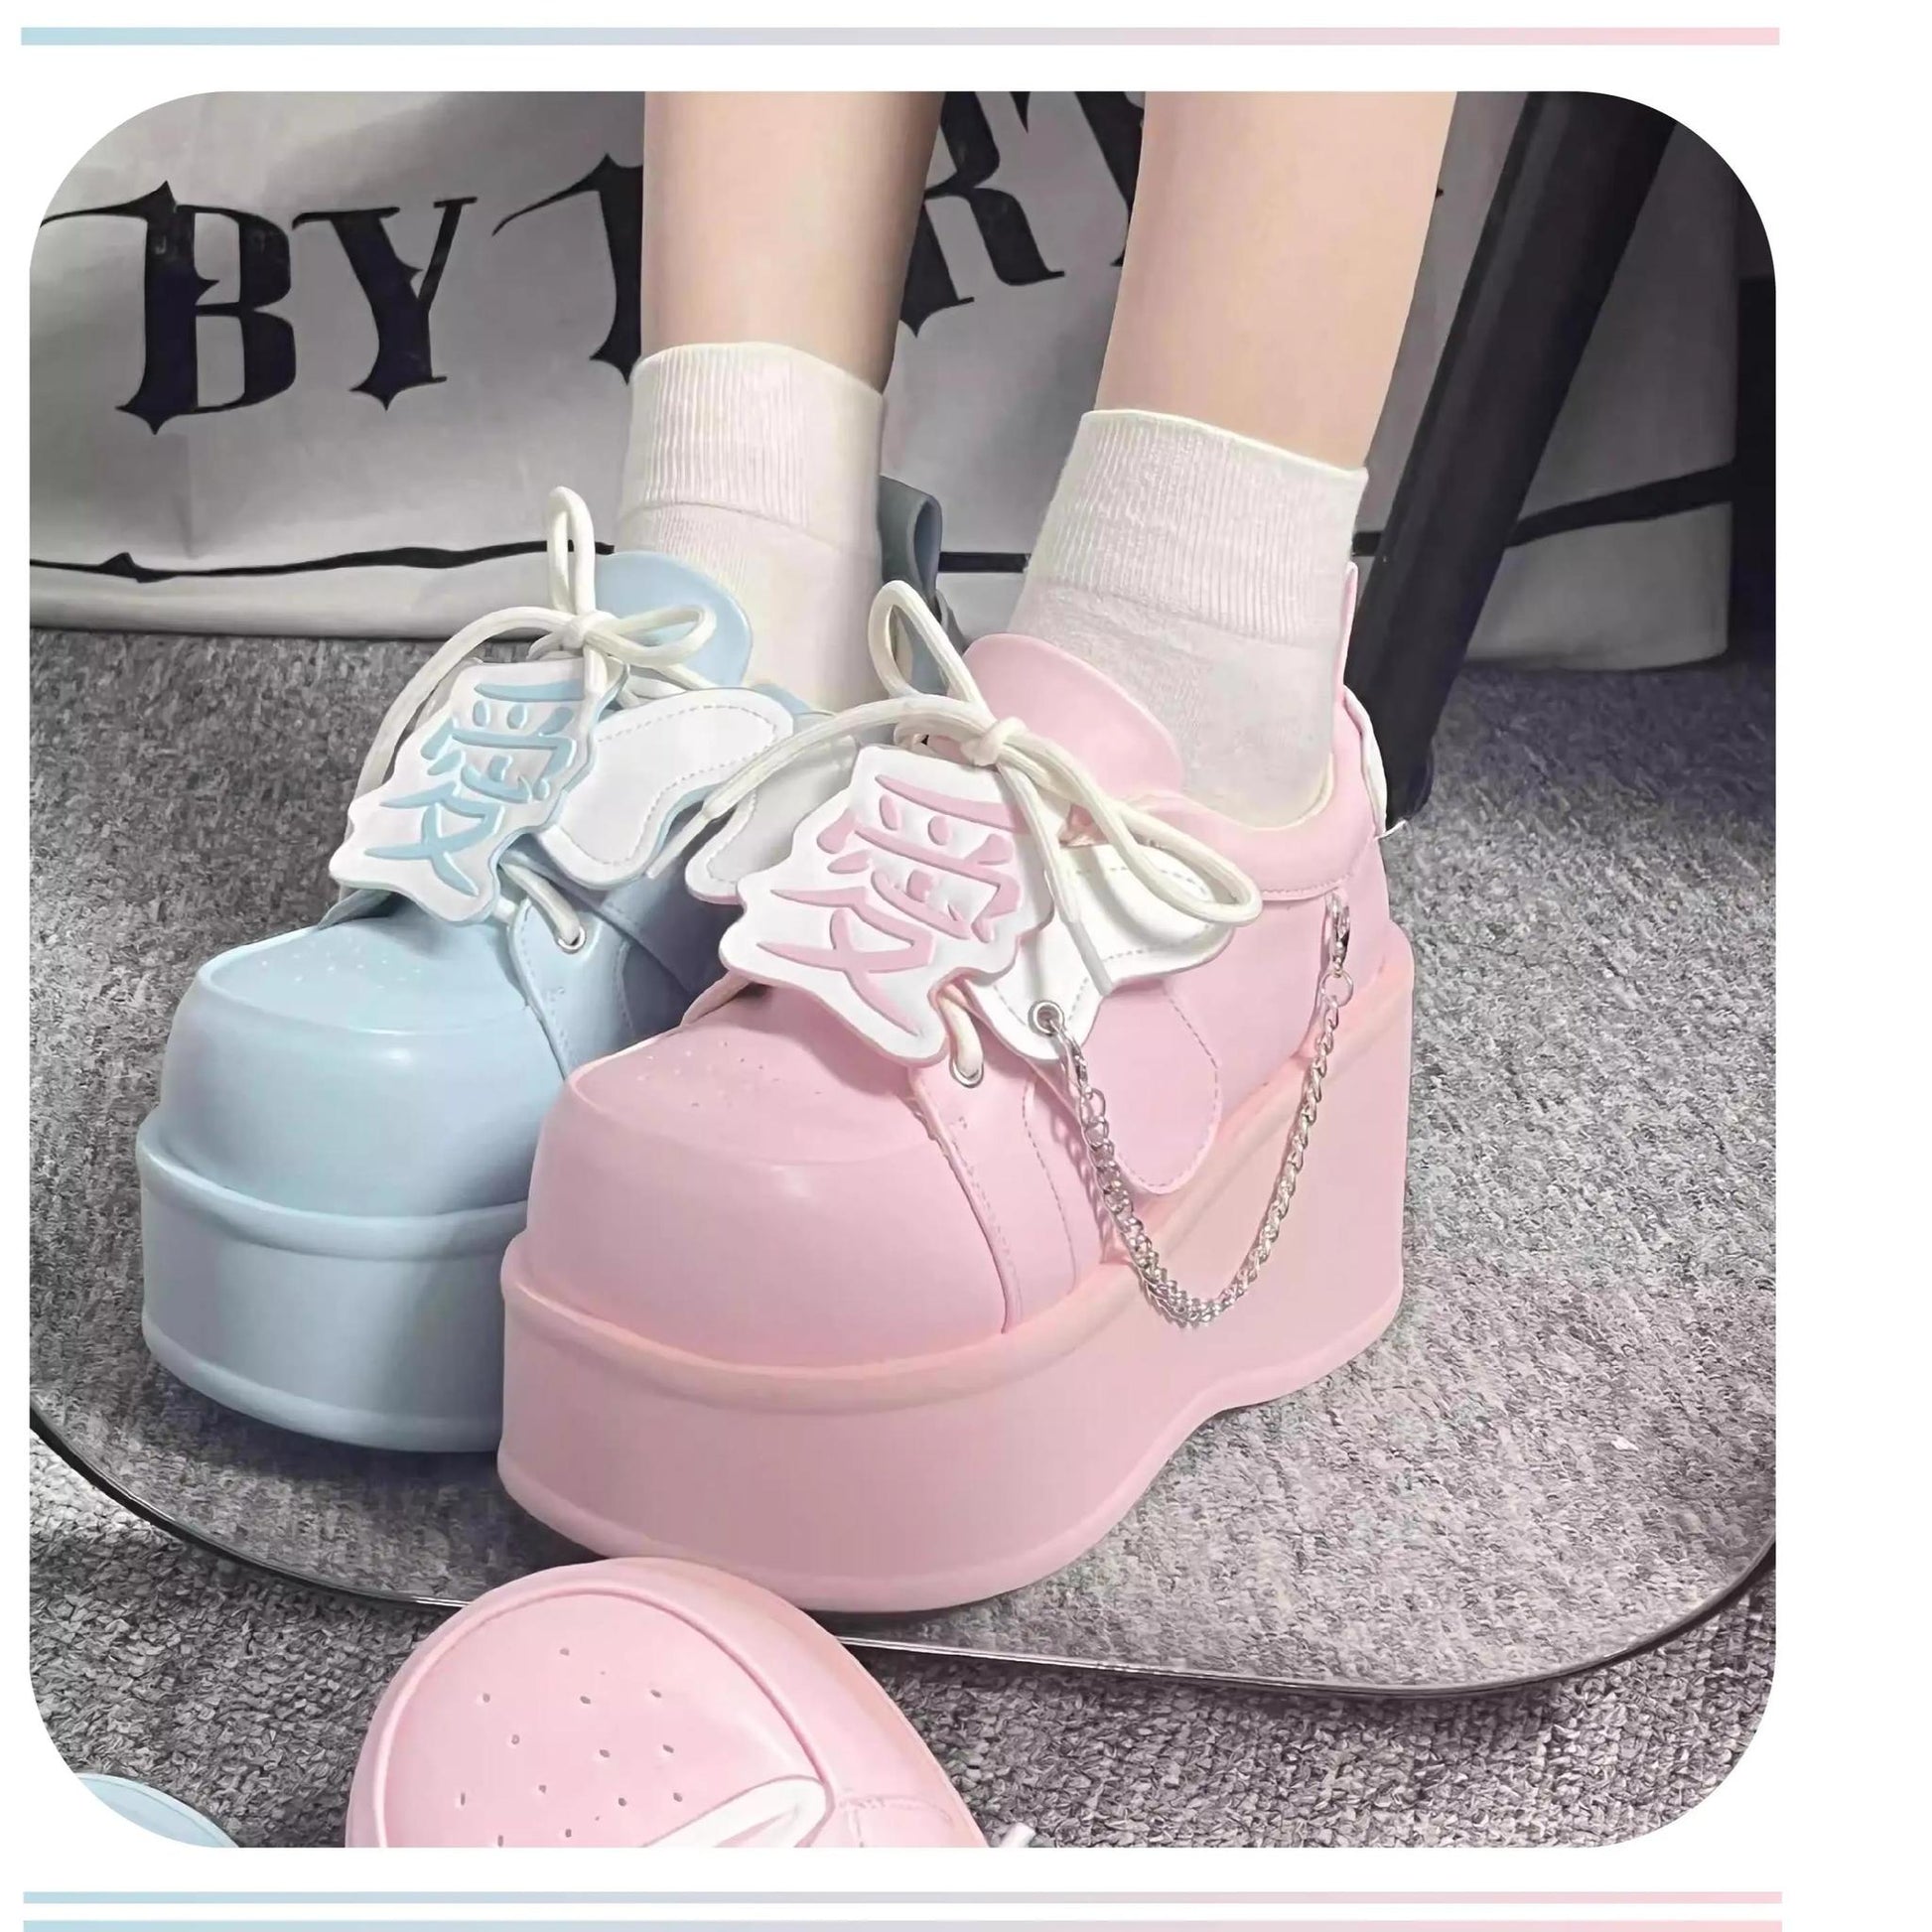 Tenshi Kaiwai Platform Shoes Subculture Thick-soled Shoes 35748:503496 35748:503496